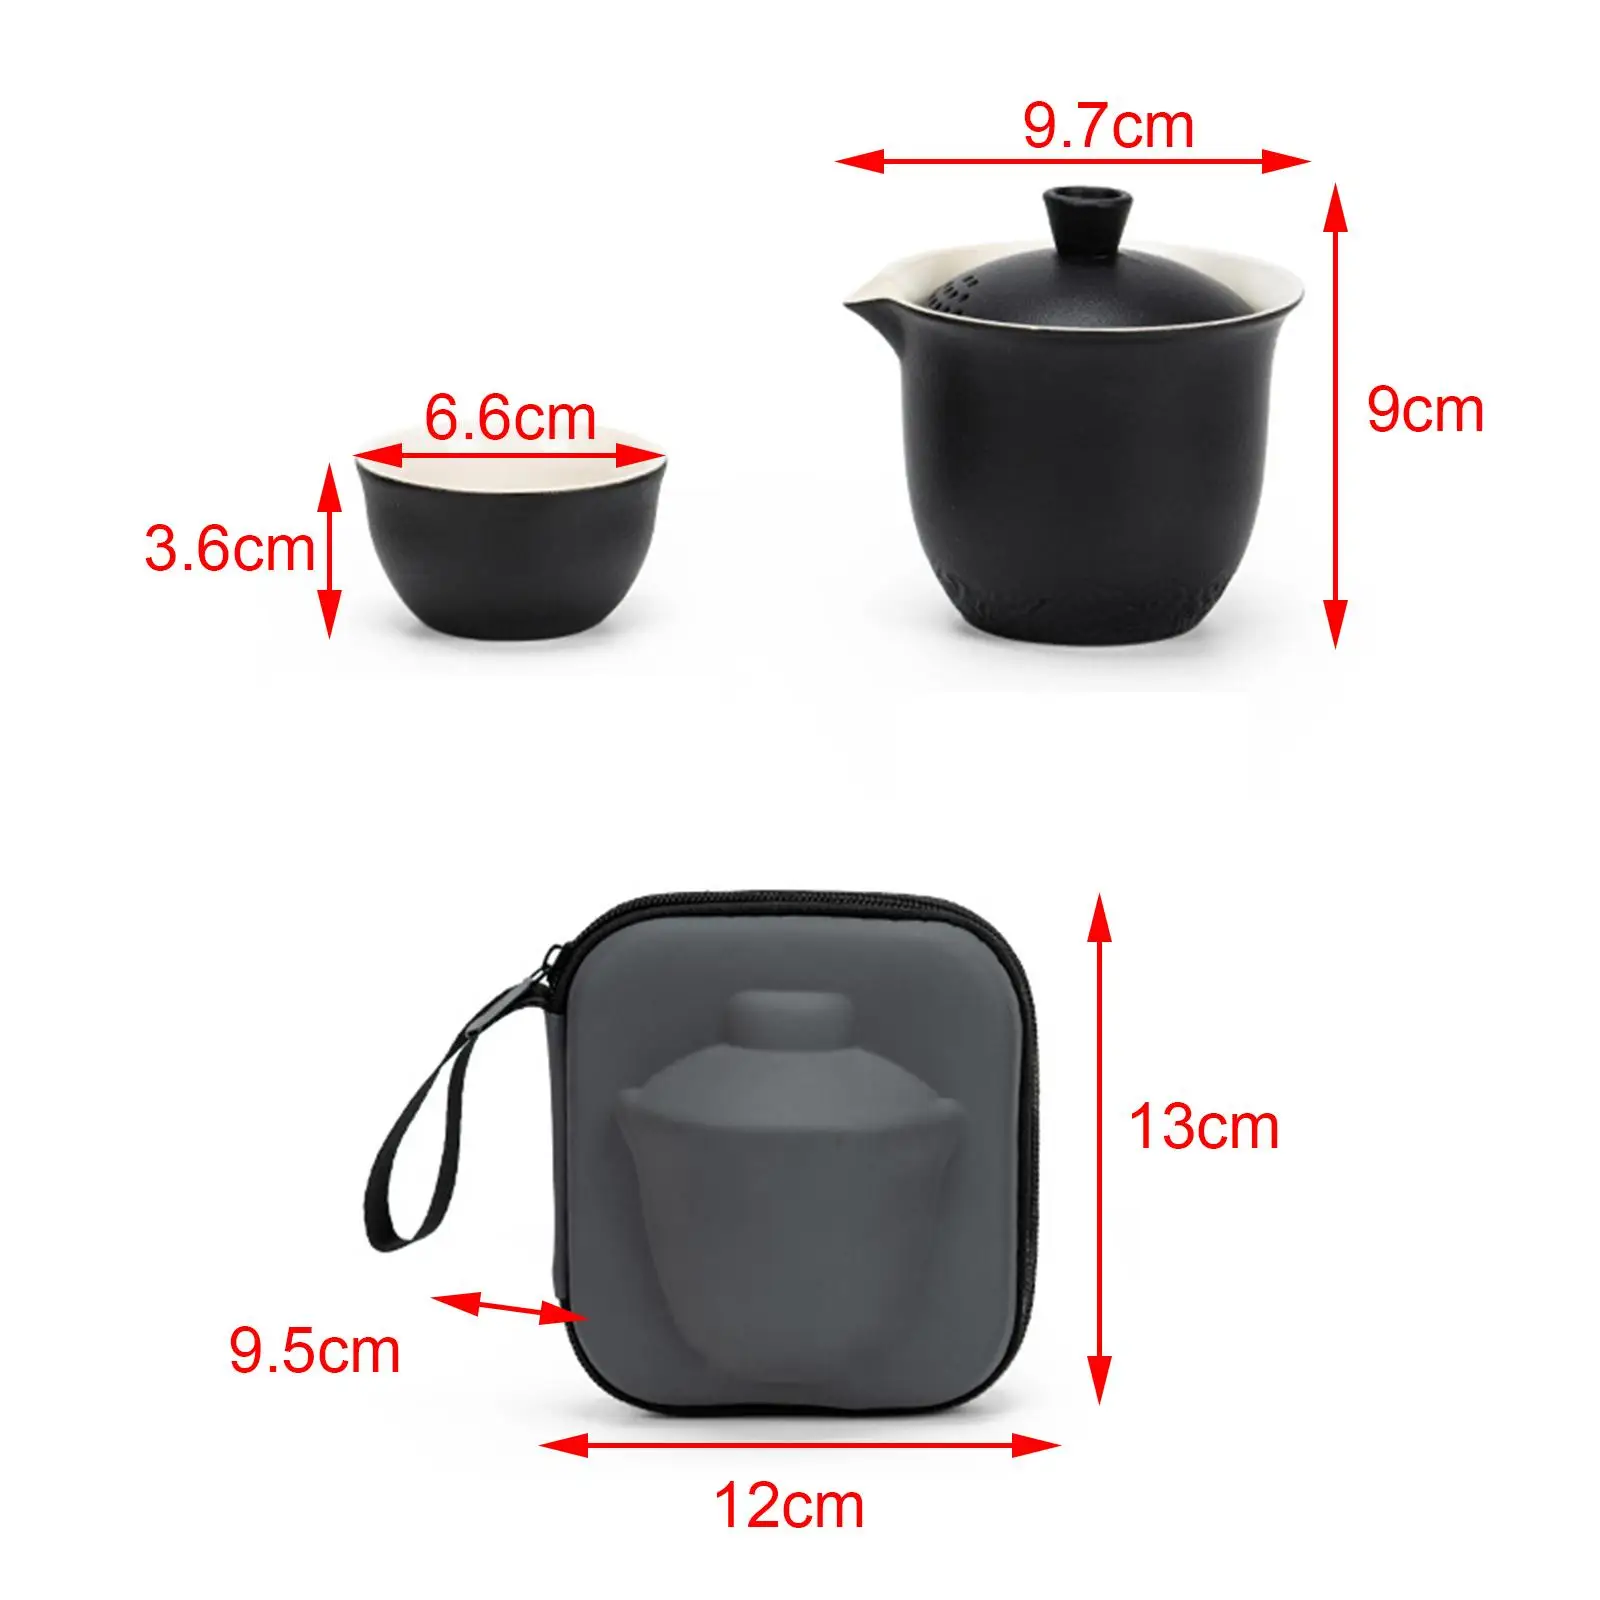 Chinese Portable Tea Set Heatproof Convenient Modern Kung Fu Teapot Infuser for Traveling Tea House Blooming and Loose Leaf